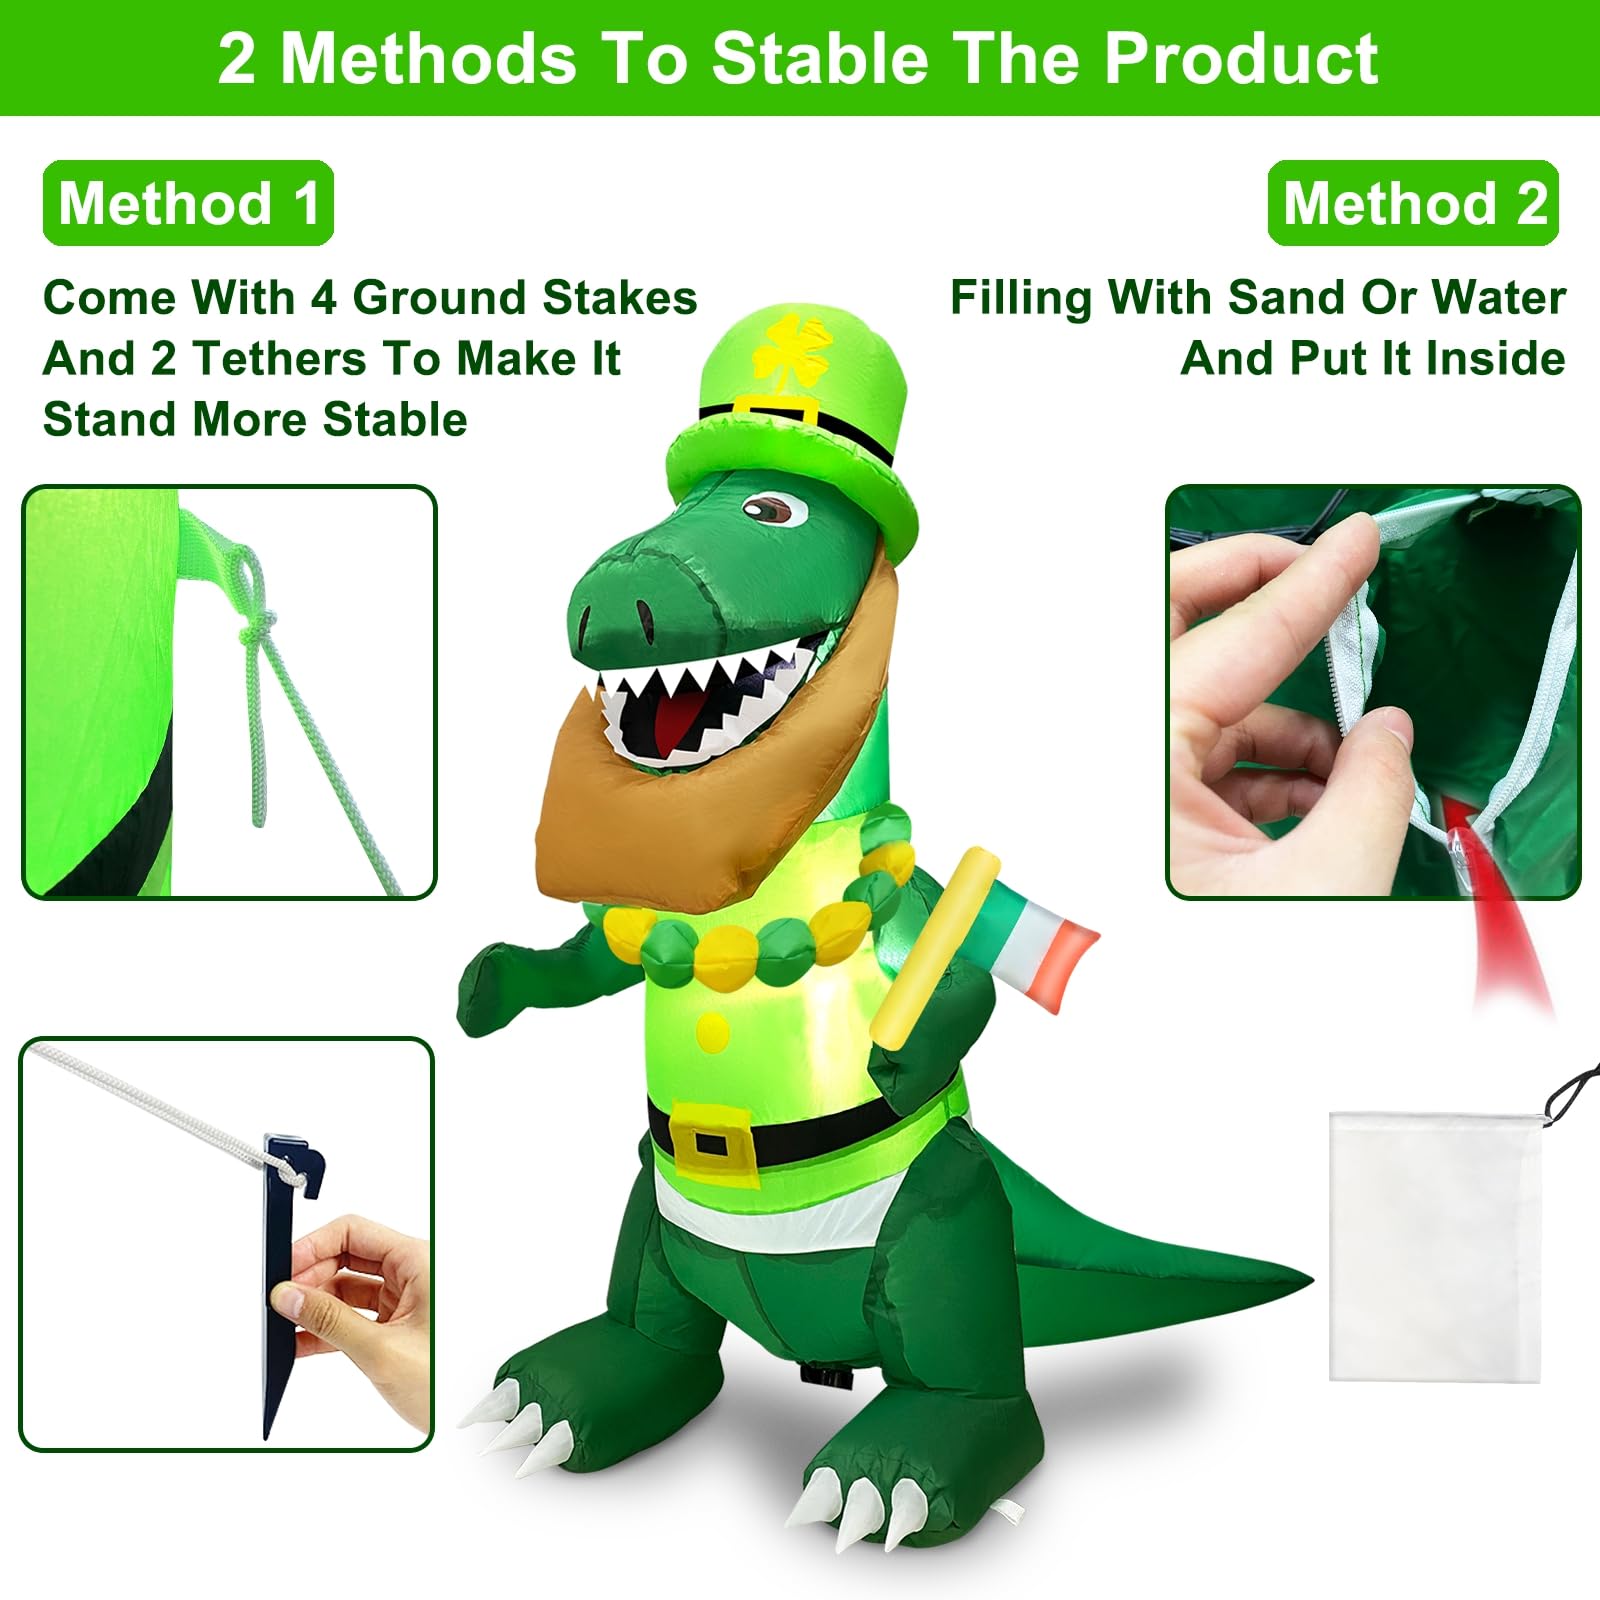 TURNMEON 4FT Dinosaur St. Patrick's Day Inflatables Decorations Outdoor Blow Up Dinosaur Hold Irish Flag Wear Necklace Shamrocks Hat LED Lights St Patricks Day Decor Indoor Home Yard Garden Lawn Party